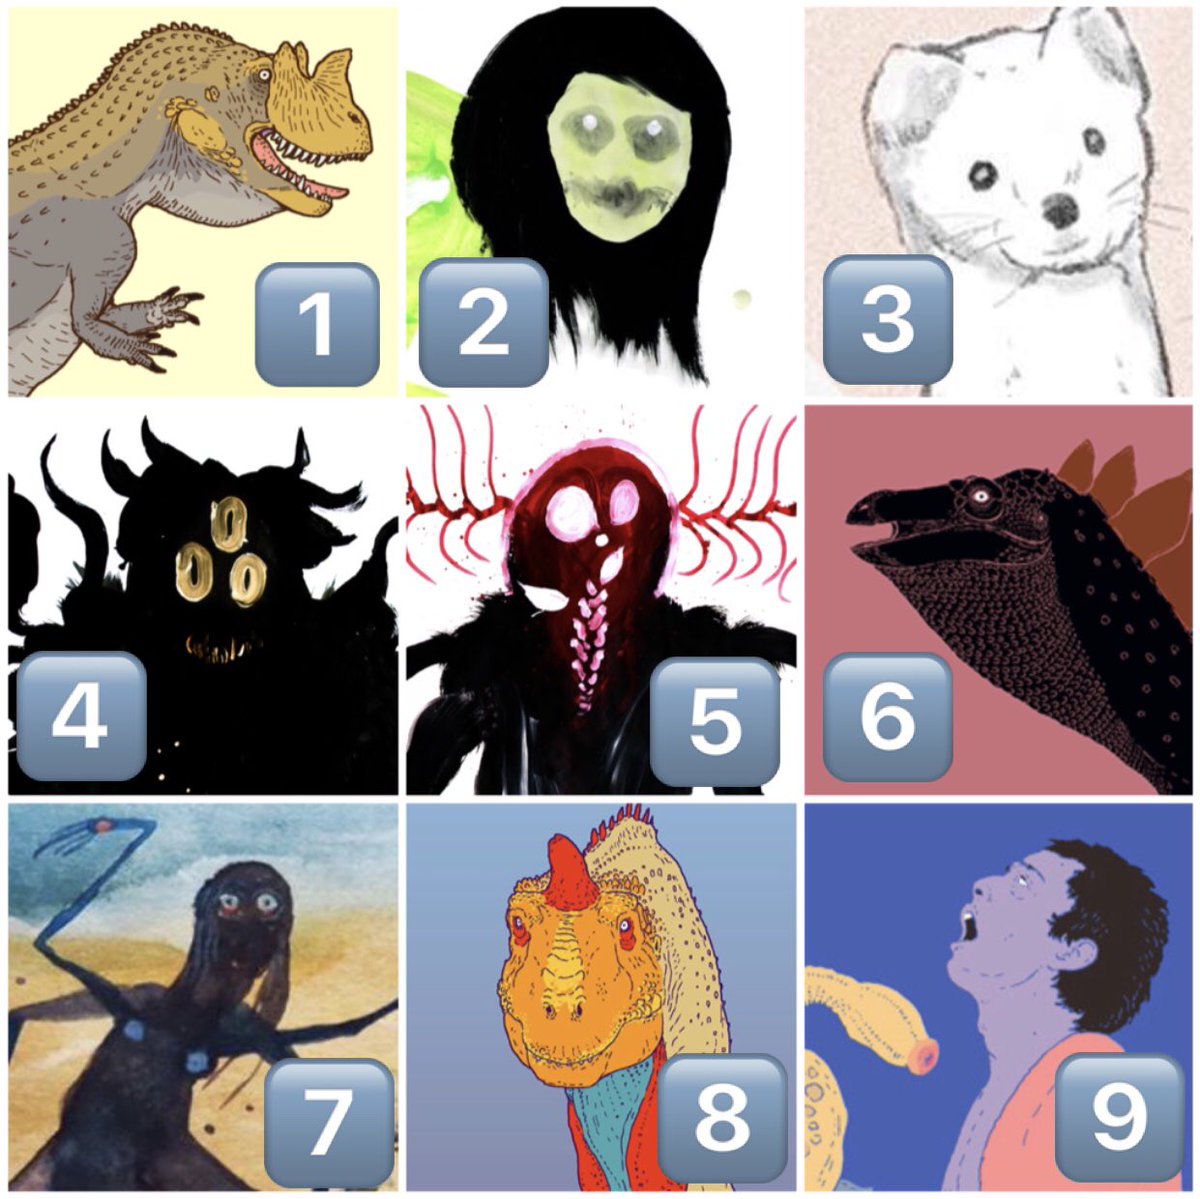 Tangent Realms On A Scale Of 1 9 Which Cmkosemen Creature Are You Today More At T Co Pmewvhux81 Art Artist Documentary Film Paleoart Palaeoart Contemporaryart Painting Drawing Monster Demon Alien Tangentrealms